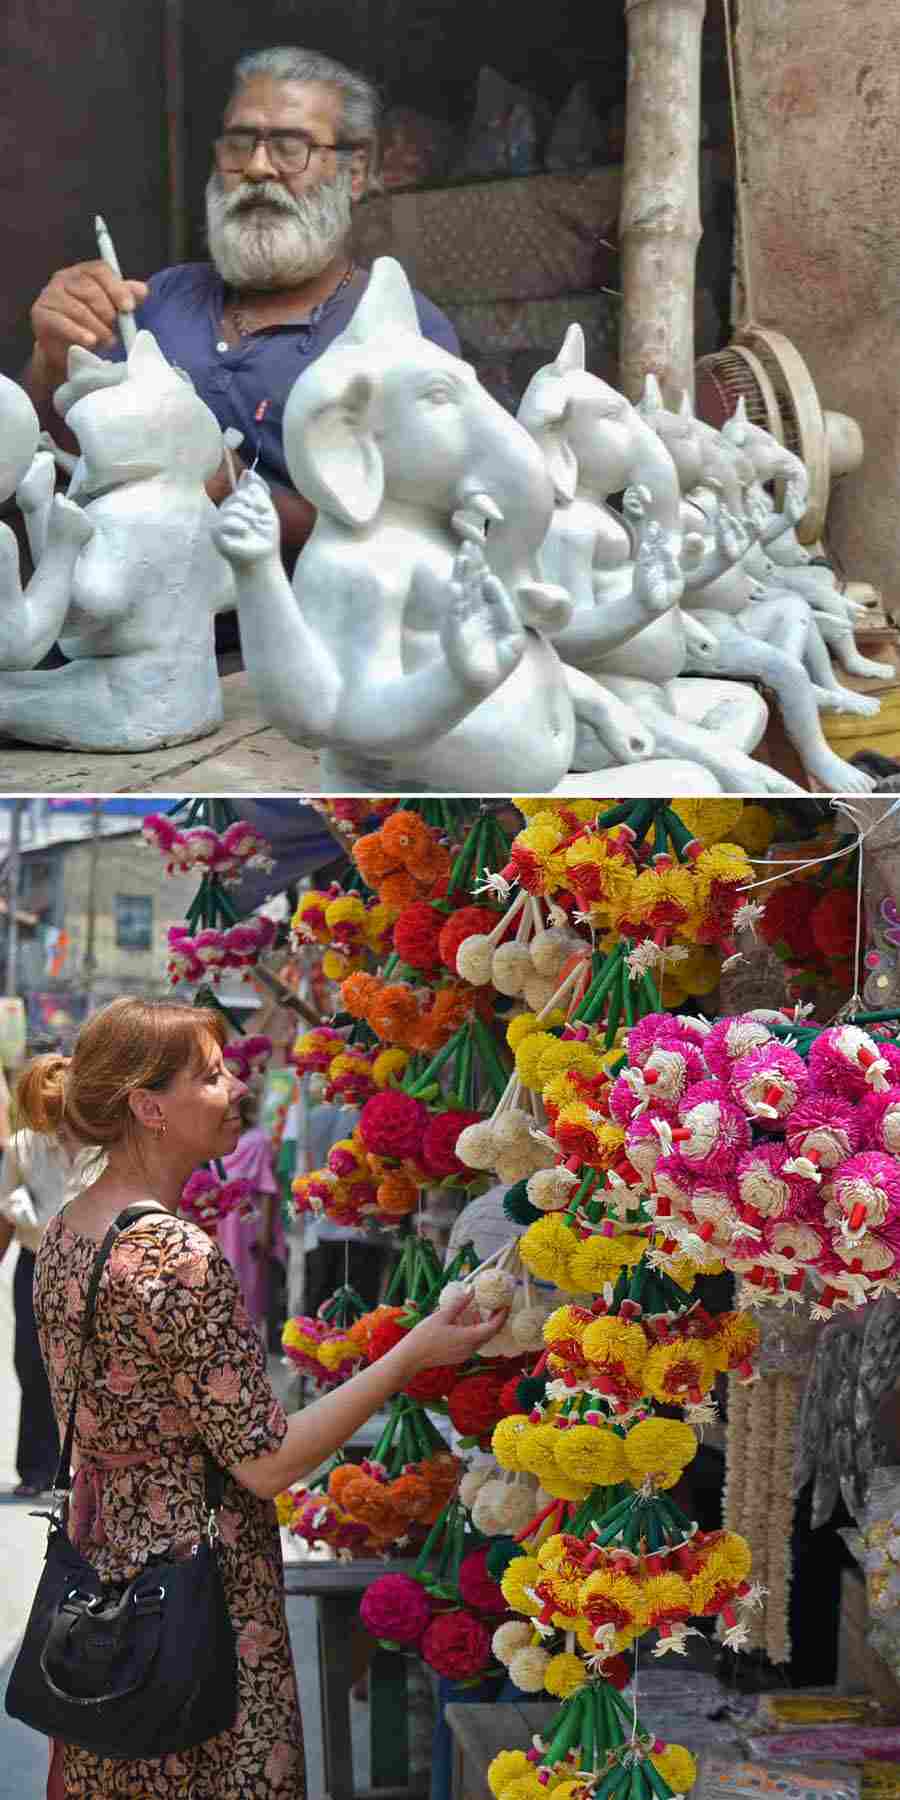 Finishing touches being given to idols of Lord Ganesh at Palbari under Krishnanagar municipality and (above) a foreigner admires ‘kadom phool’ being sold for decoration in puja for Nababarsho (Bengali New Year) in Kumartuli on Saturday